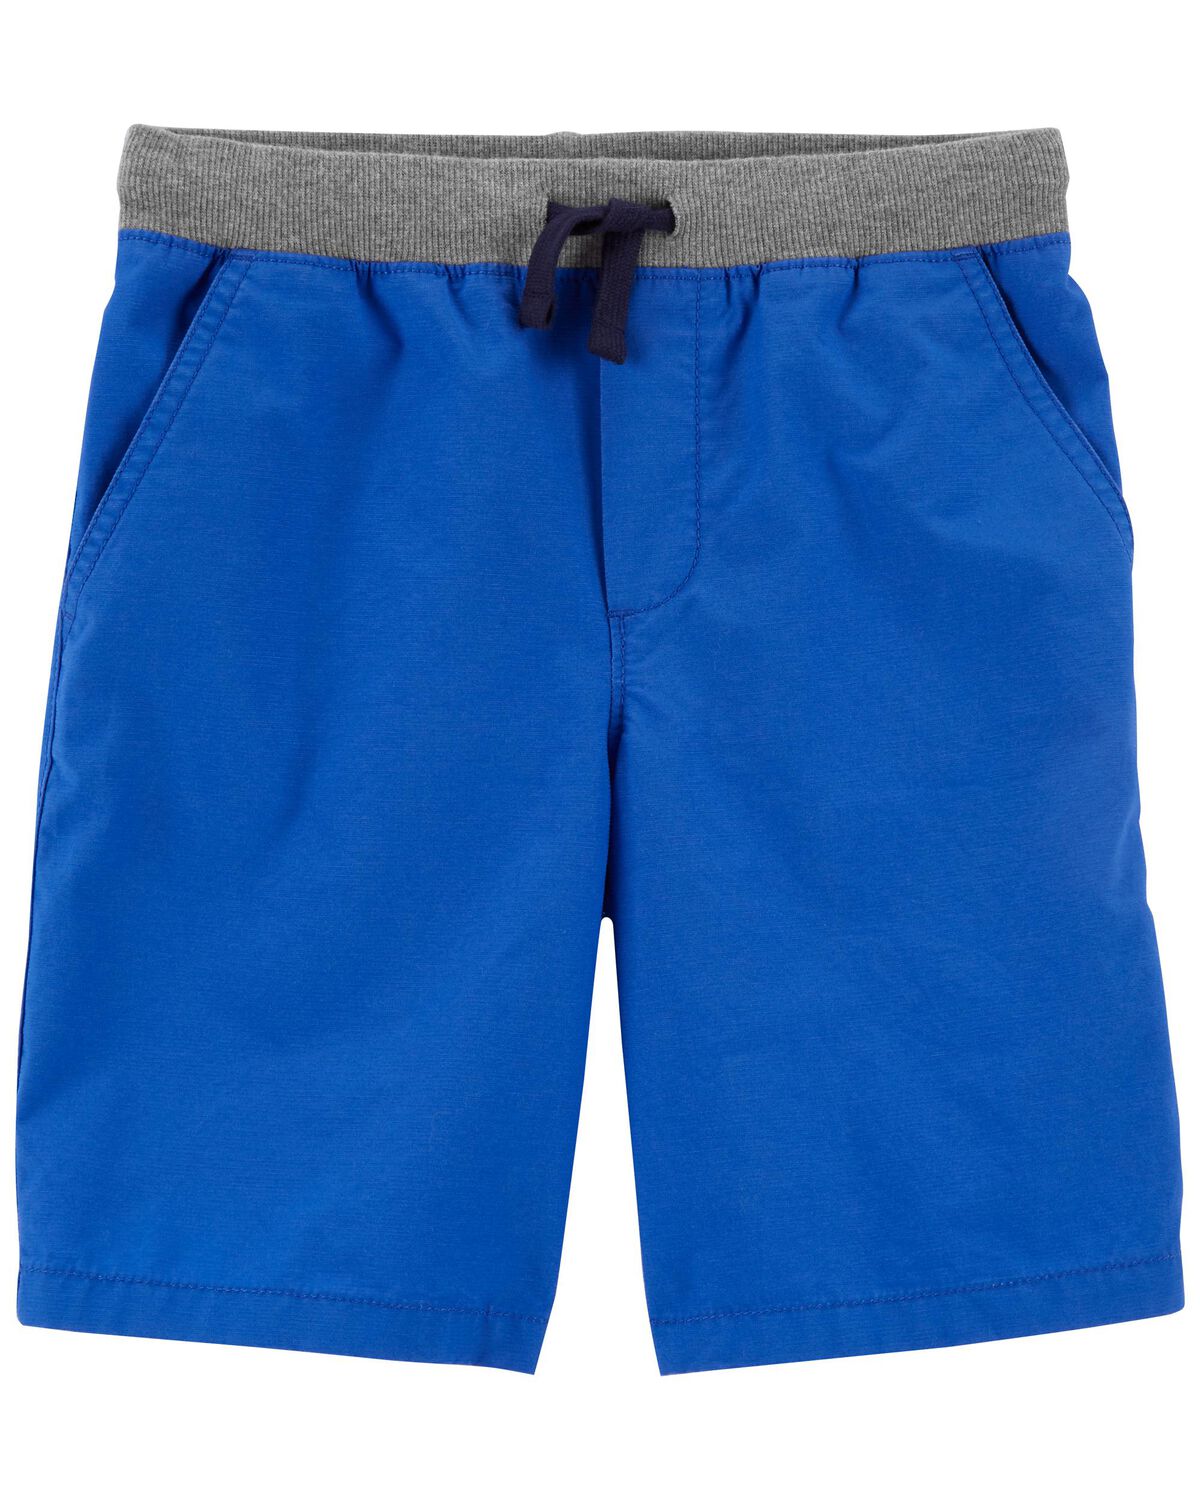 Blue Kid Pull-On Dock Shorts | carters.com